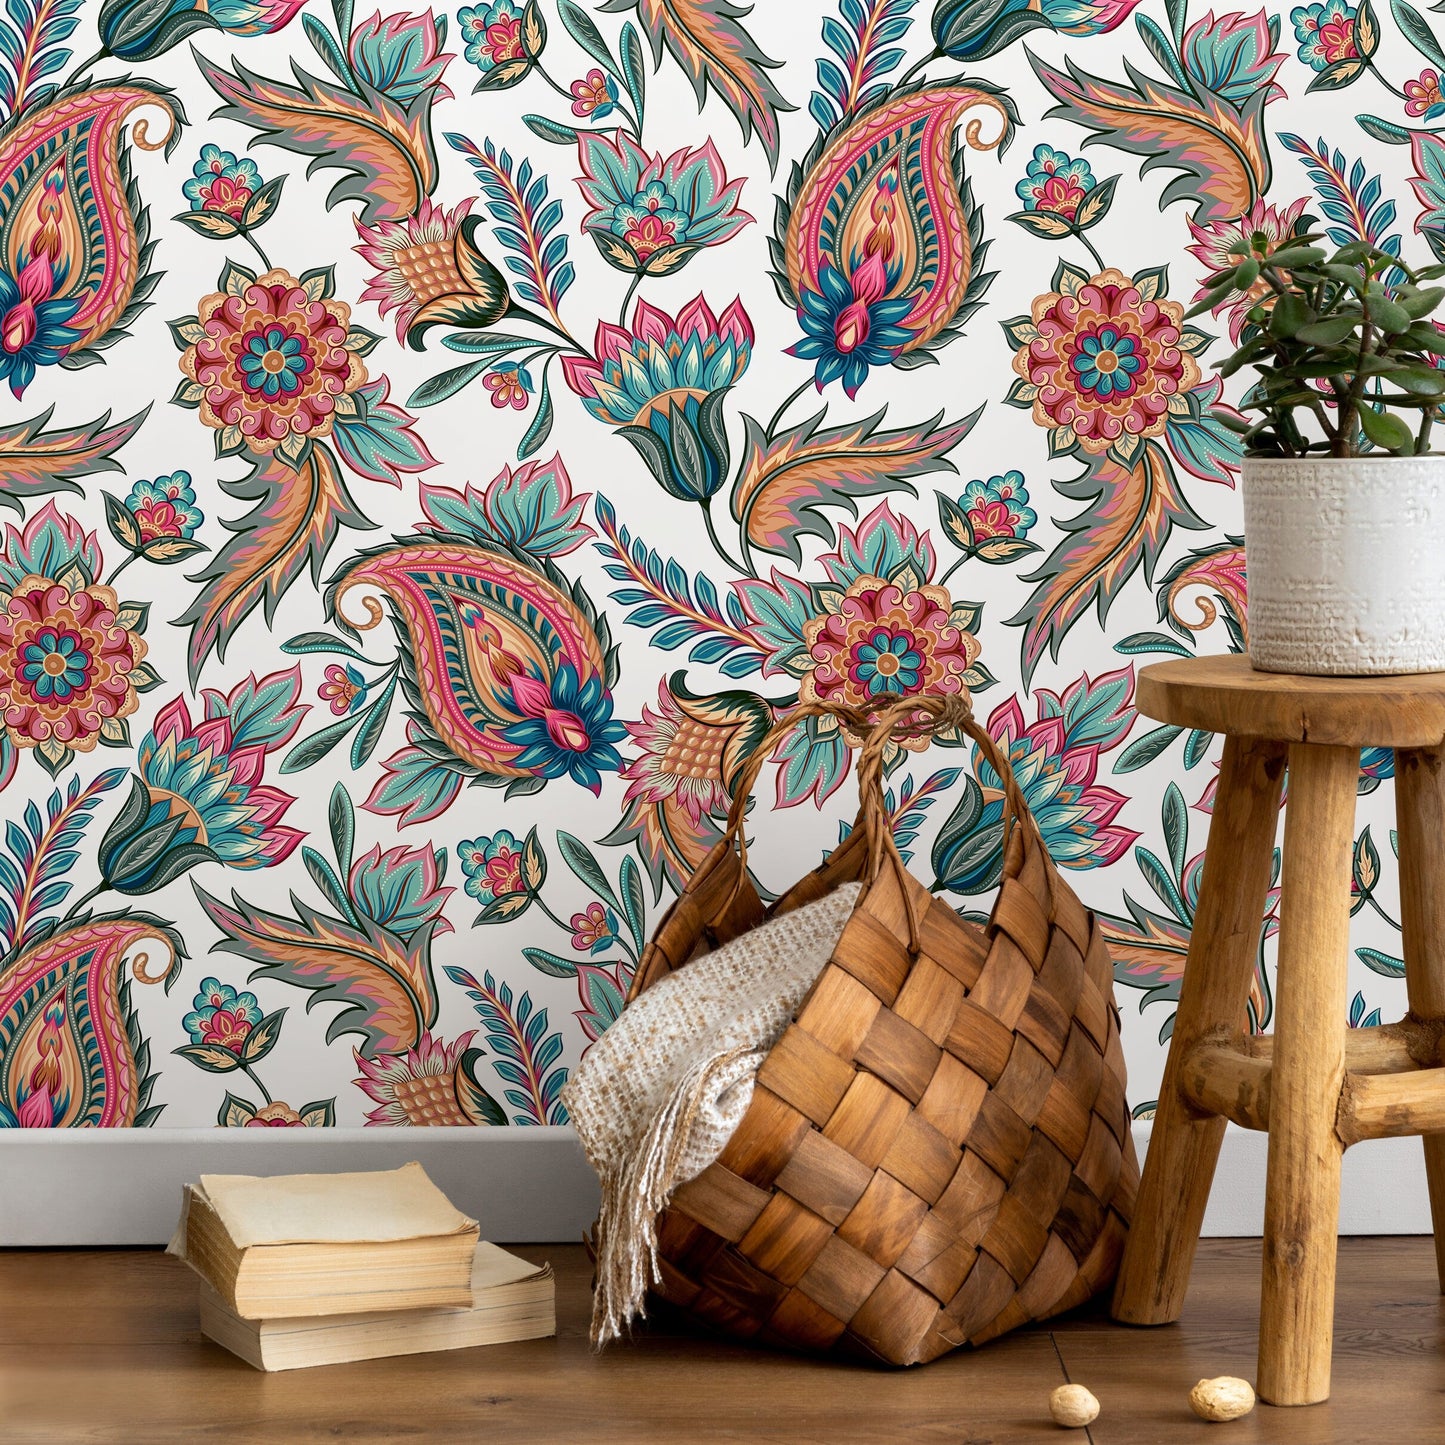 Wallpaper Peel and Stick Wallpaper Removable Wallpaper Home Decor Wall Art Wall Decor Room Decor / Colorful Feathers Boho Wallpaper - C554